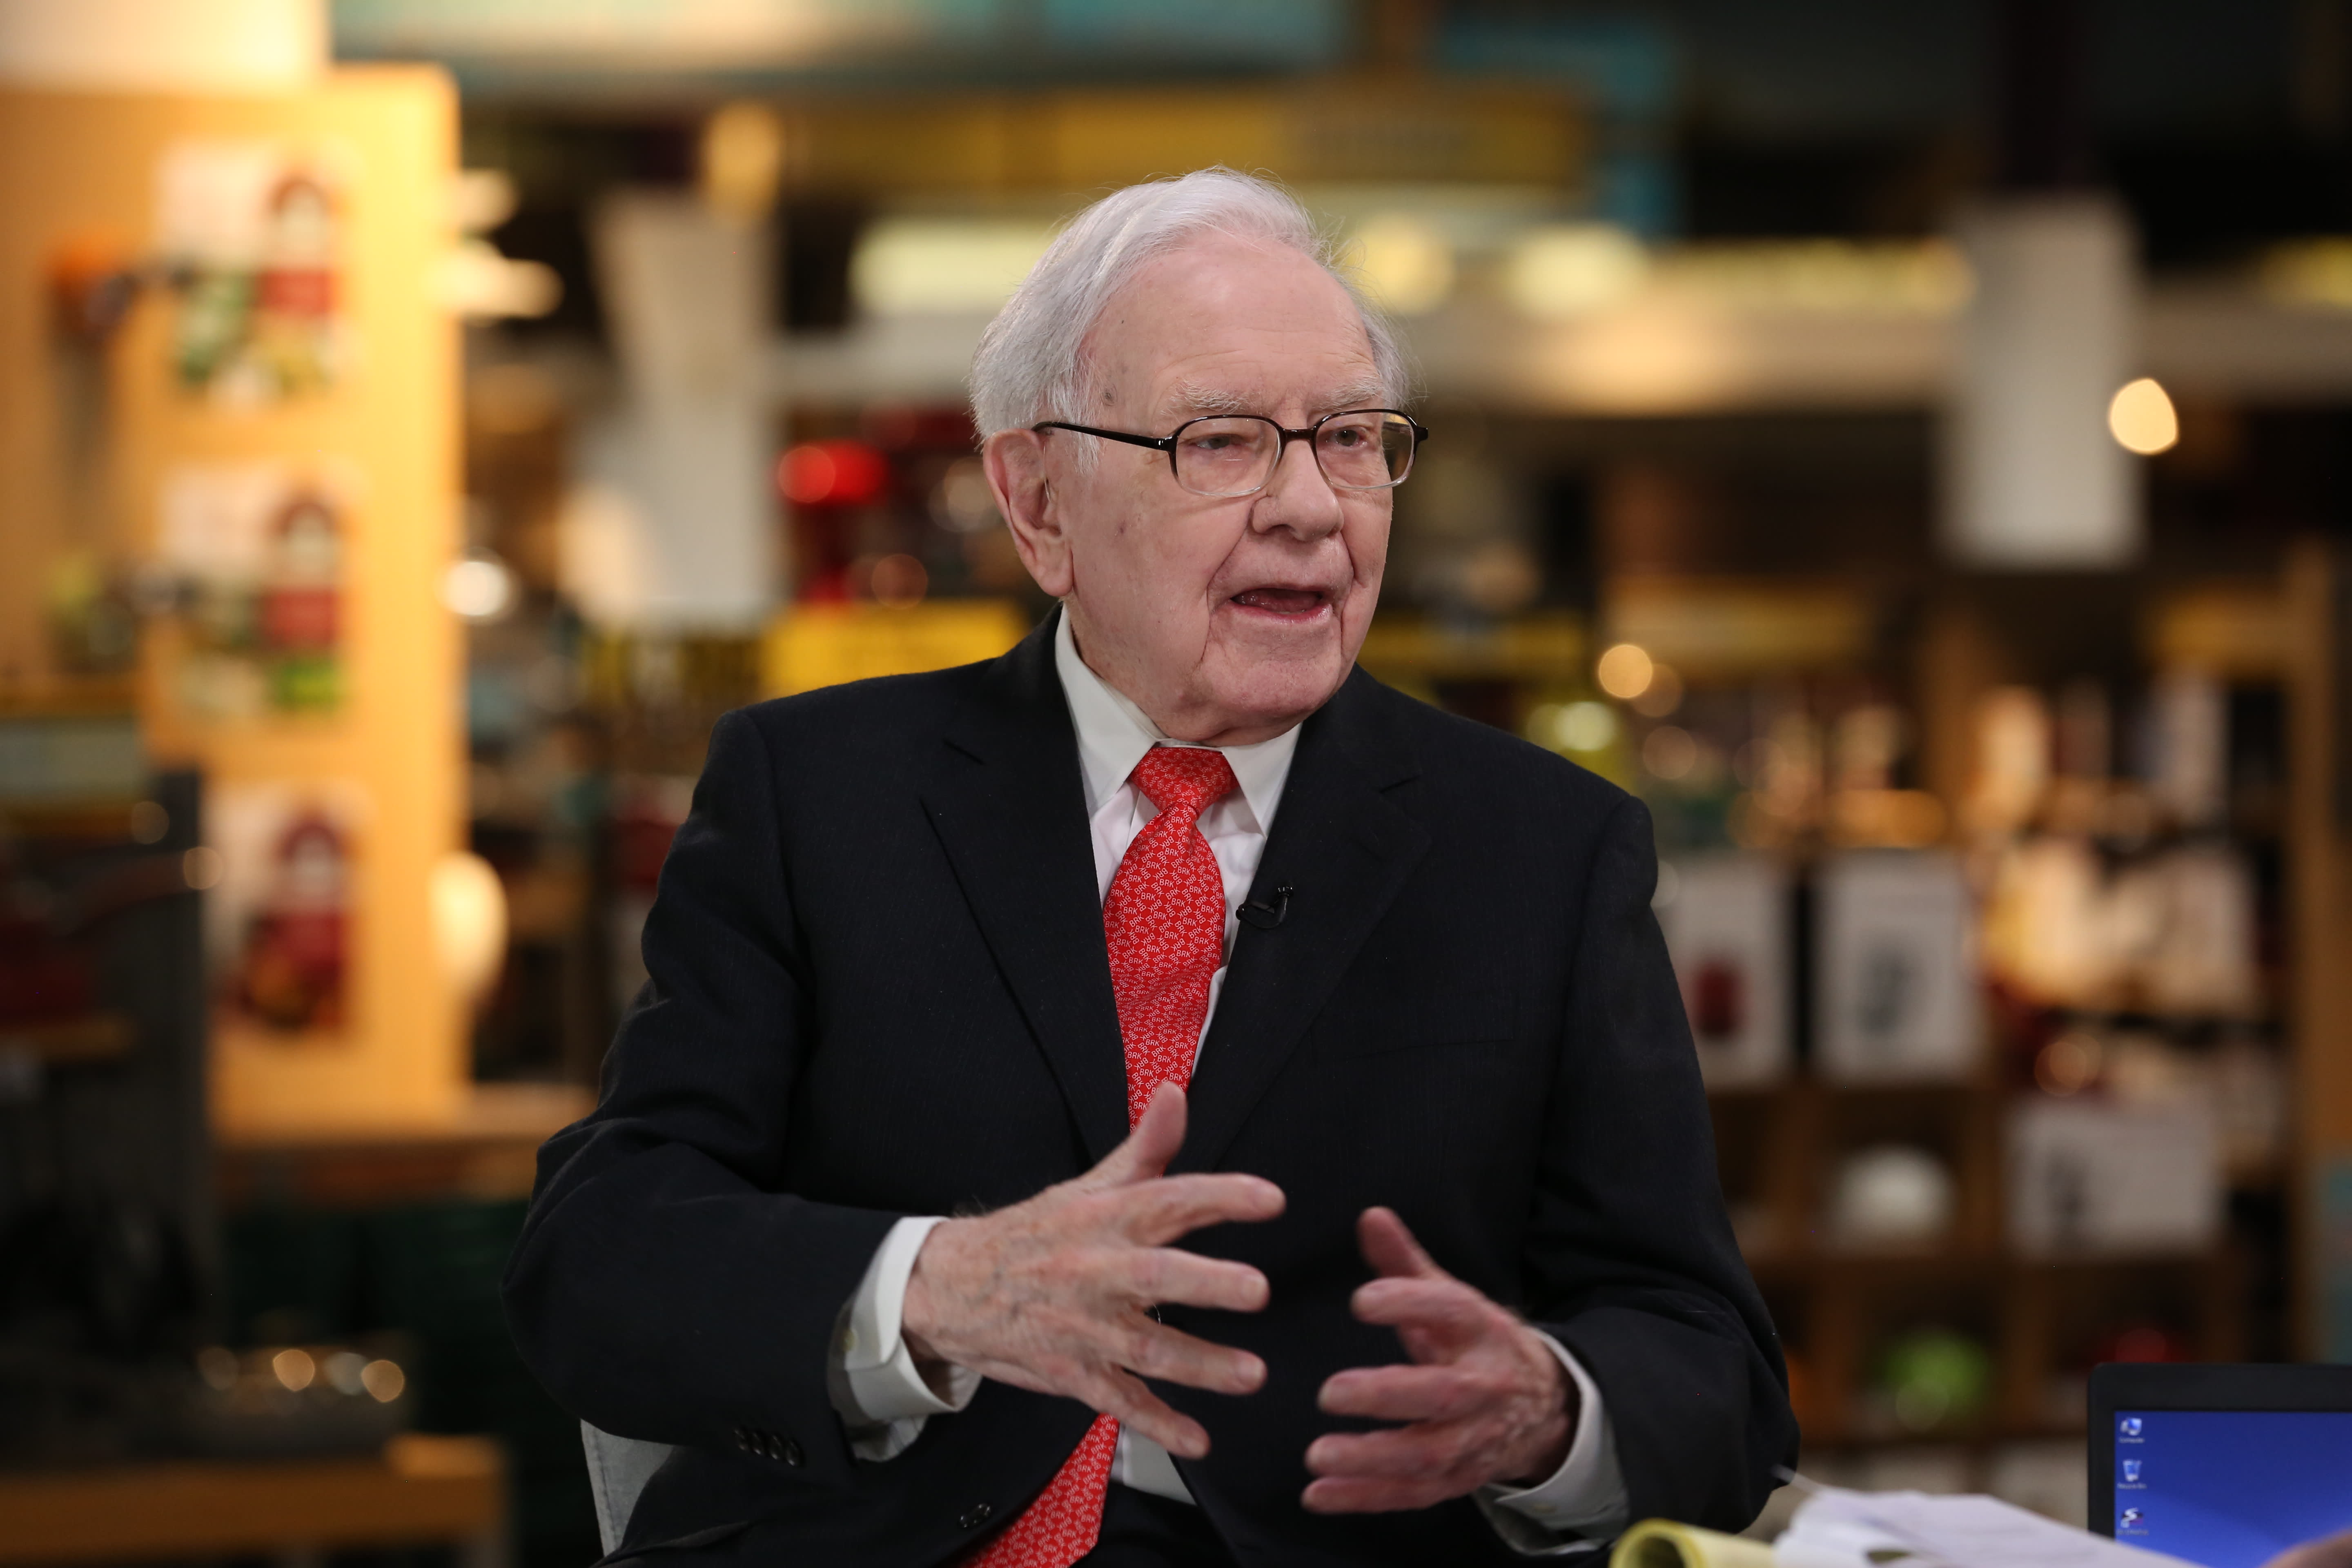 Warren Buffett Claims Bitcoin is Like a “Seashell” In His Latest Attack on Crypto